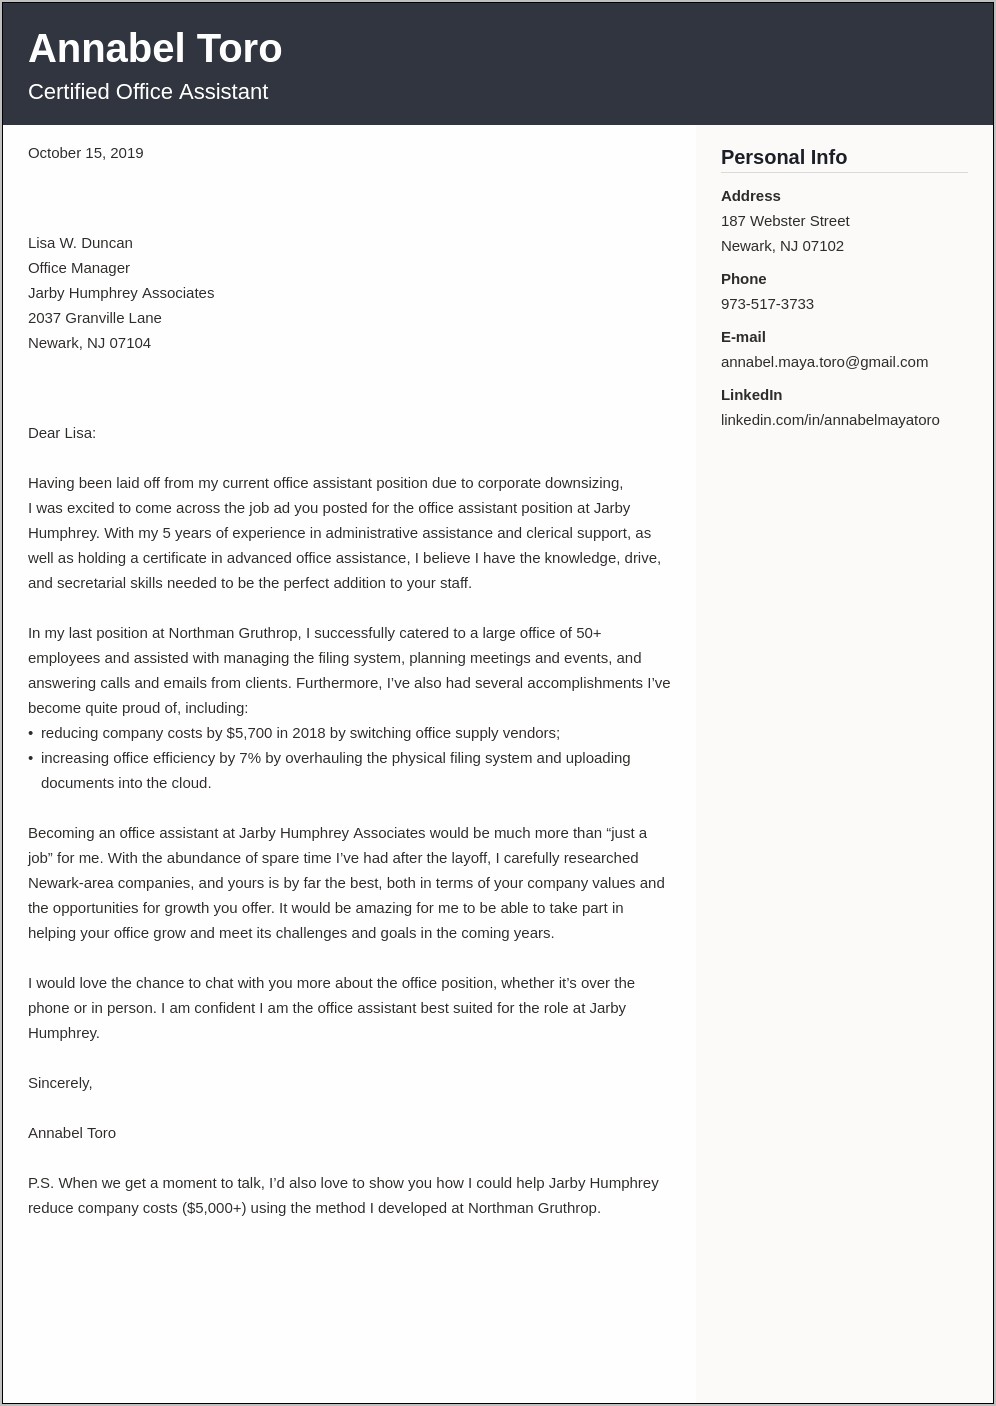 Resume Cover Letter Examples 2019